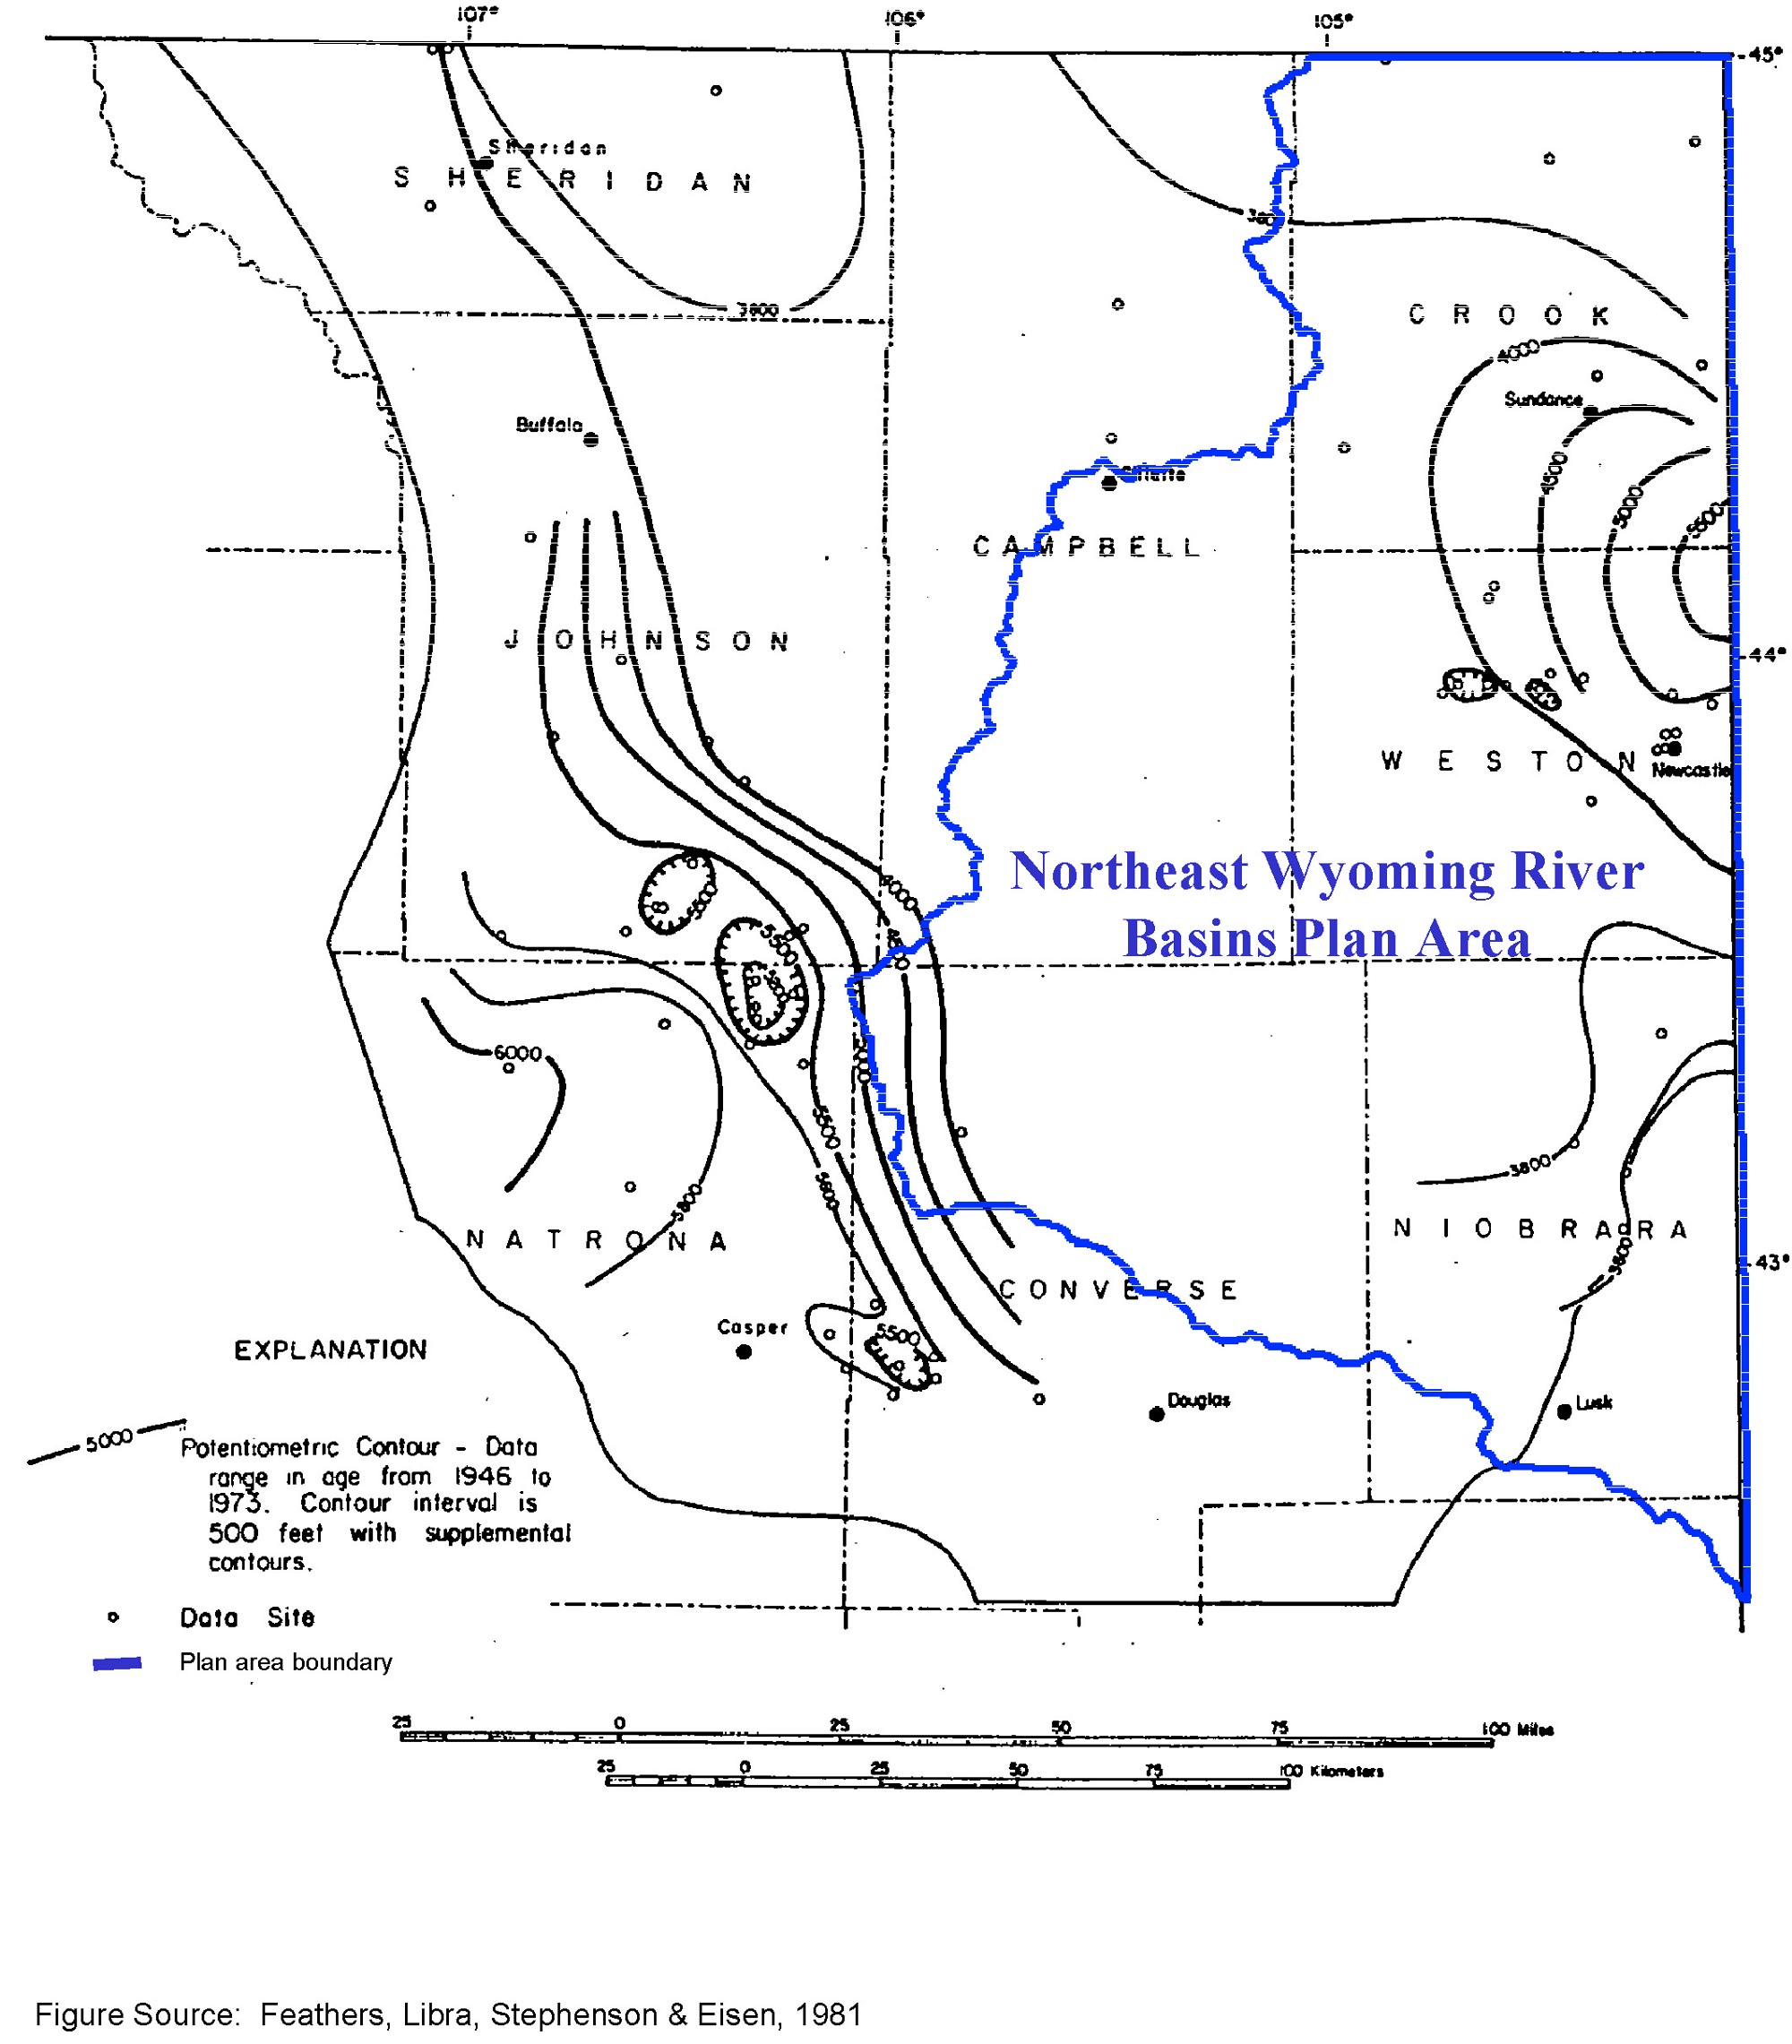 Potentiometric Surface in the Madison Aquifer (after Swenson and others, 1976).